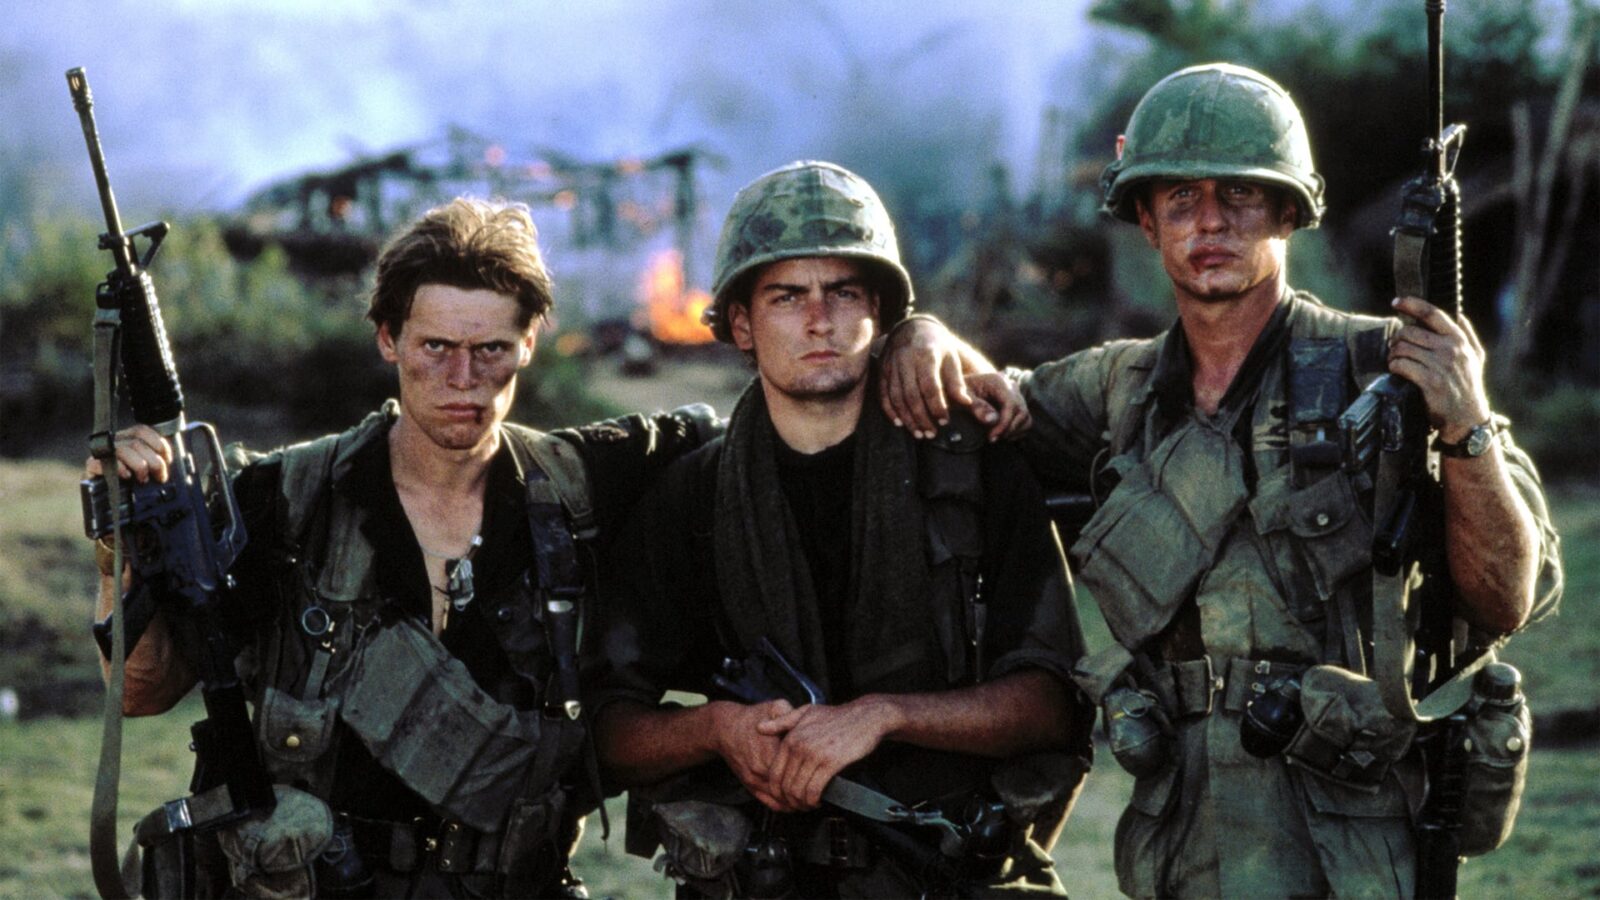 Image from the movie "Platoon"